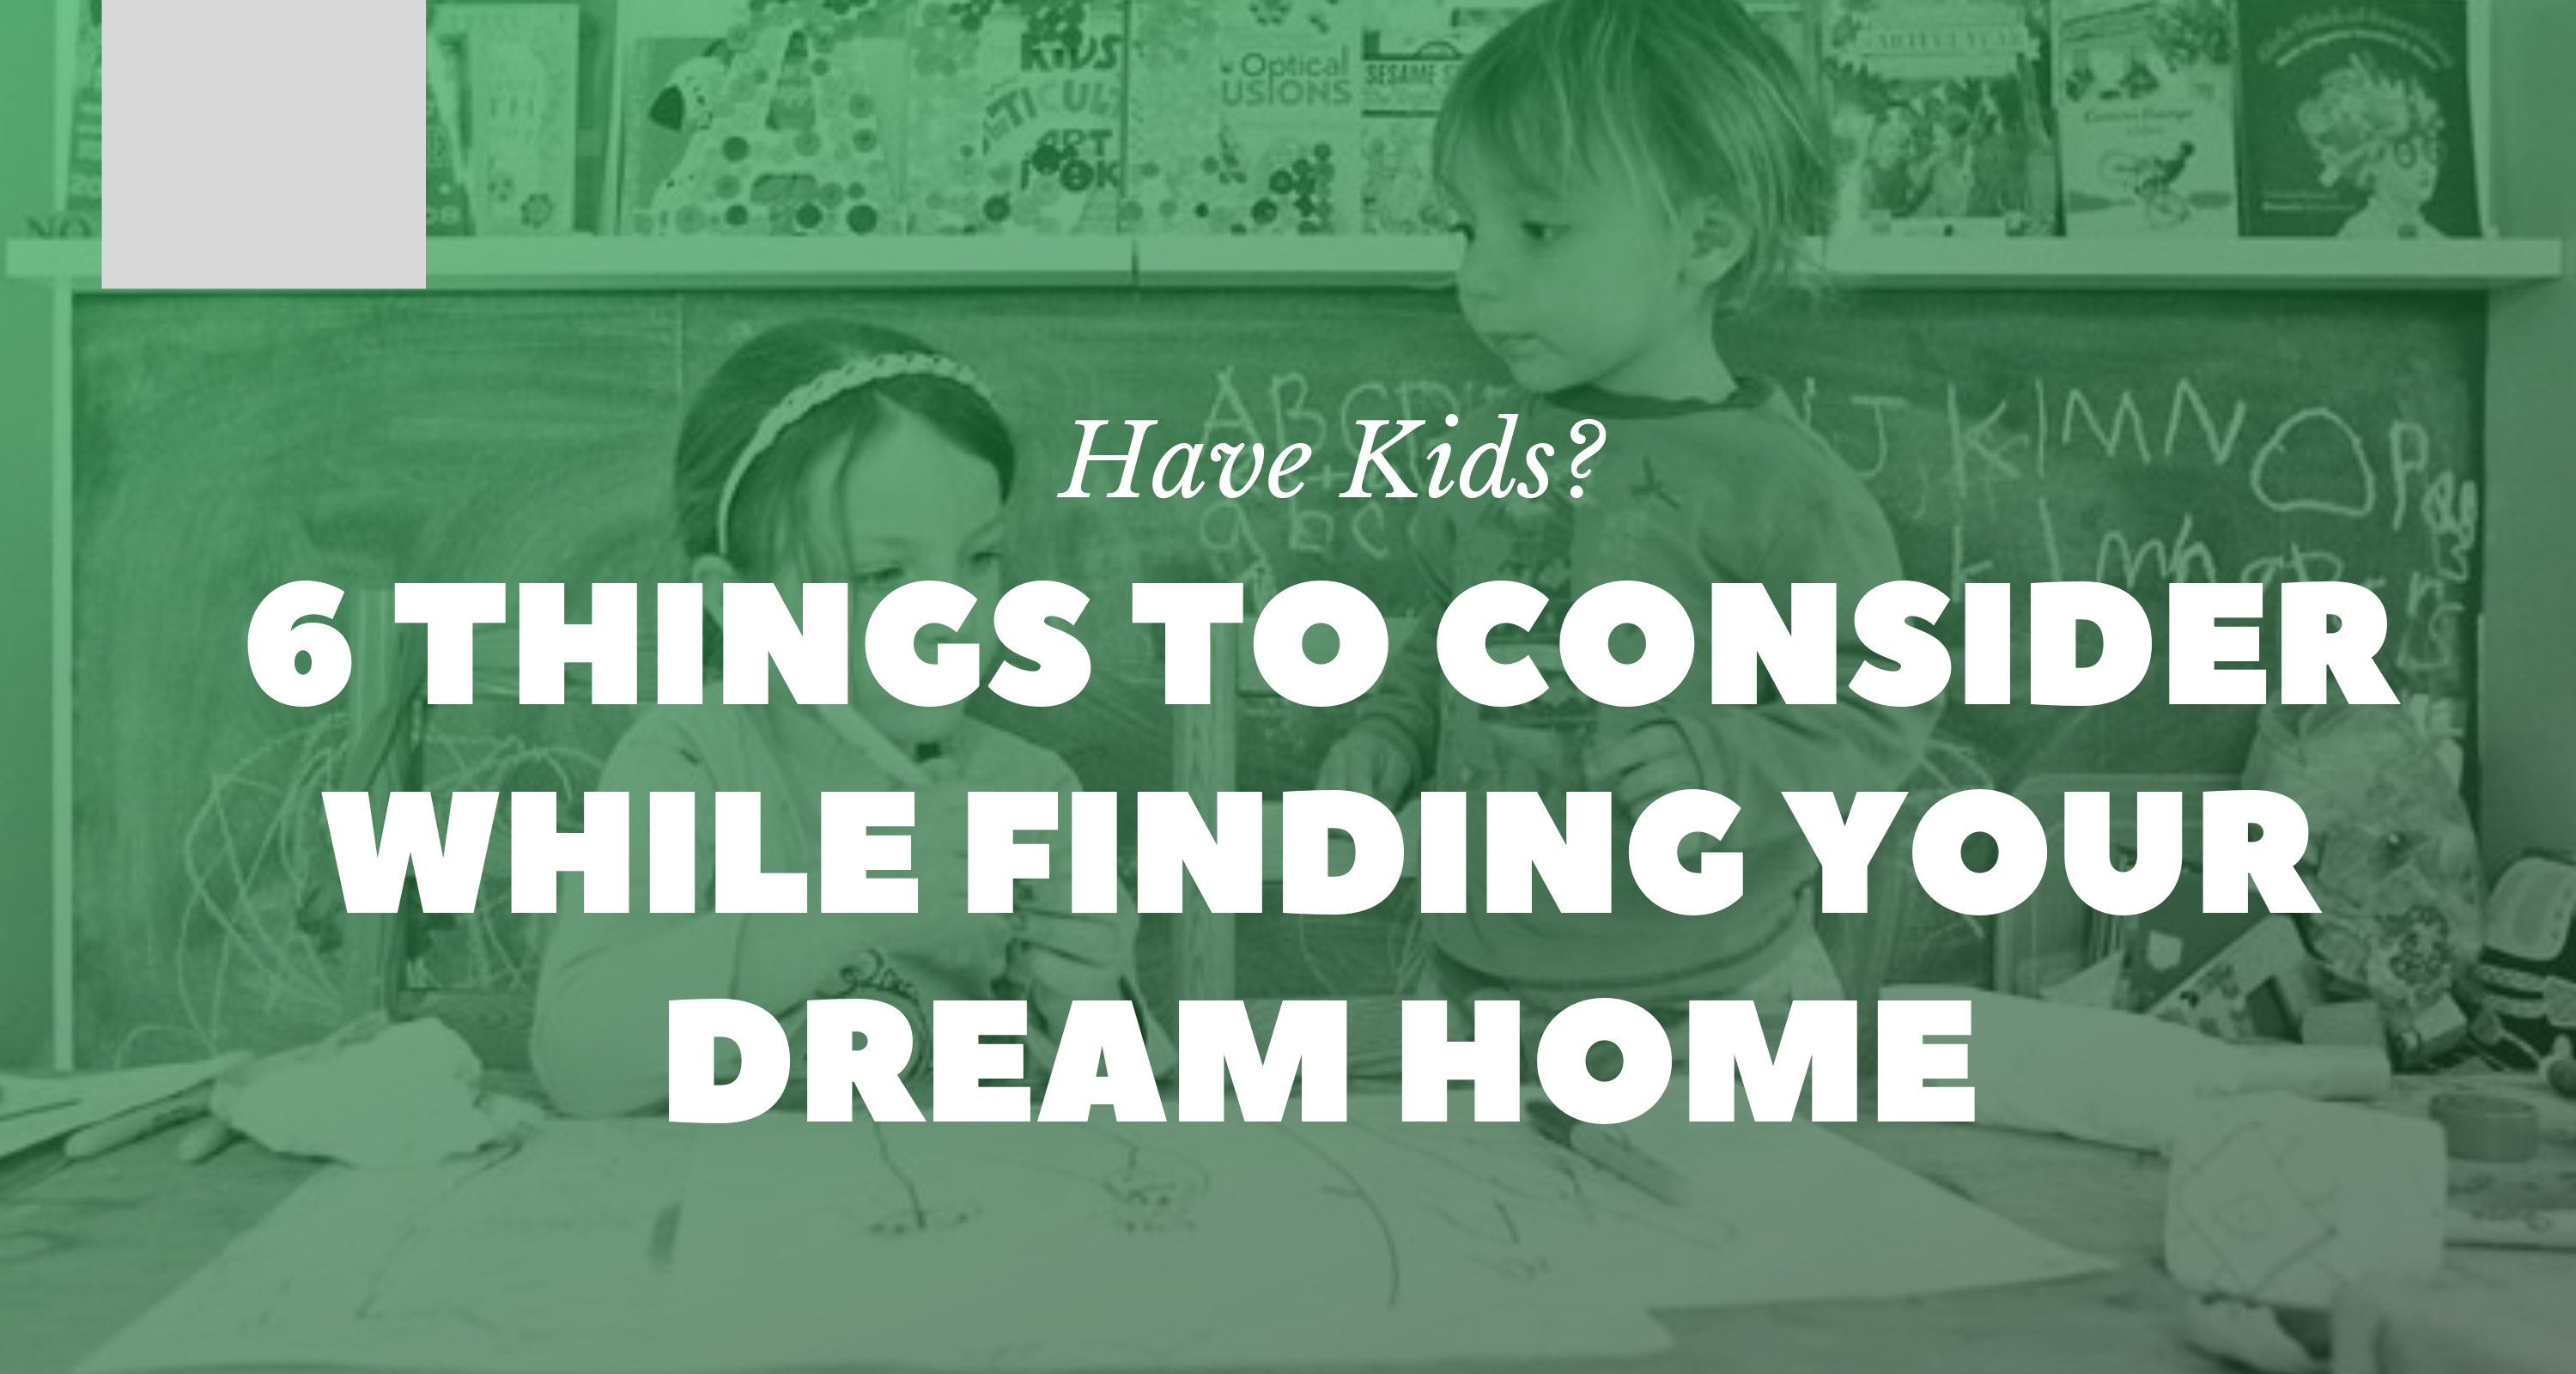 Have Kids? 6 Things To Consider While Finding Your Dream Home